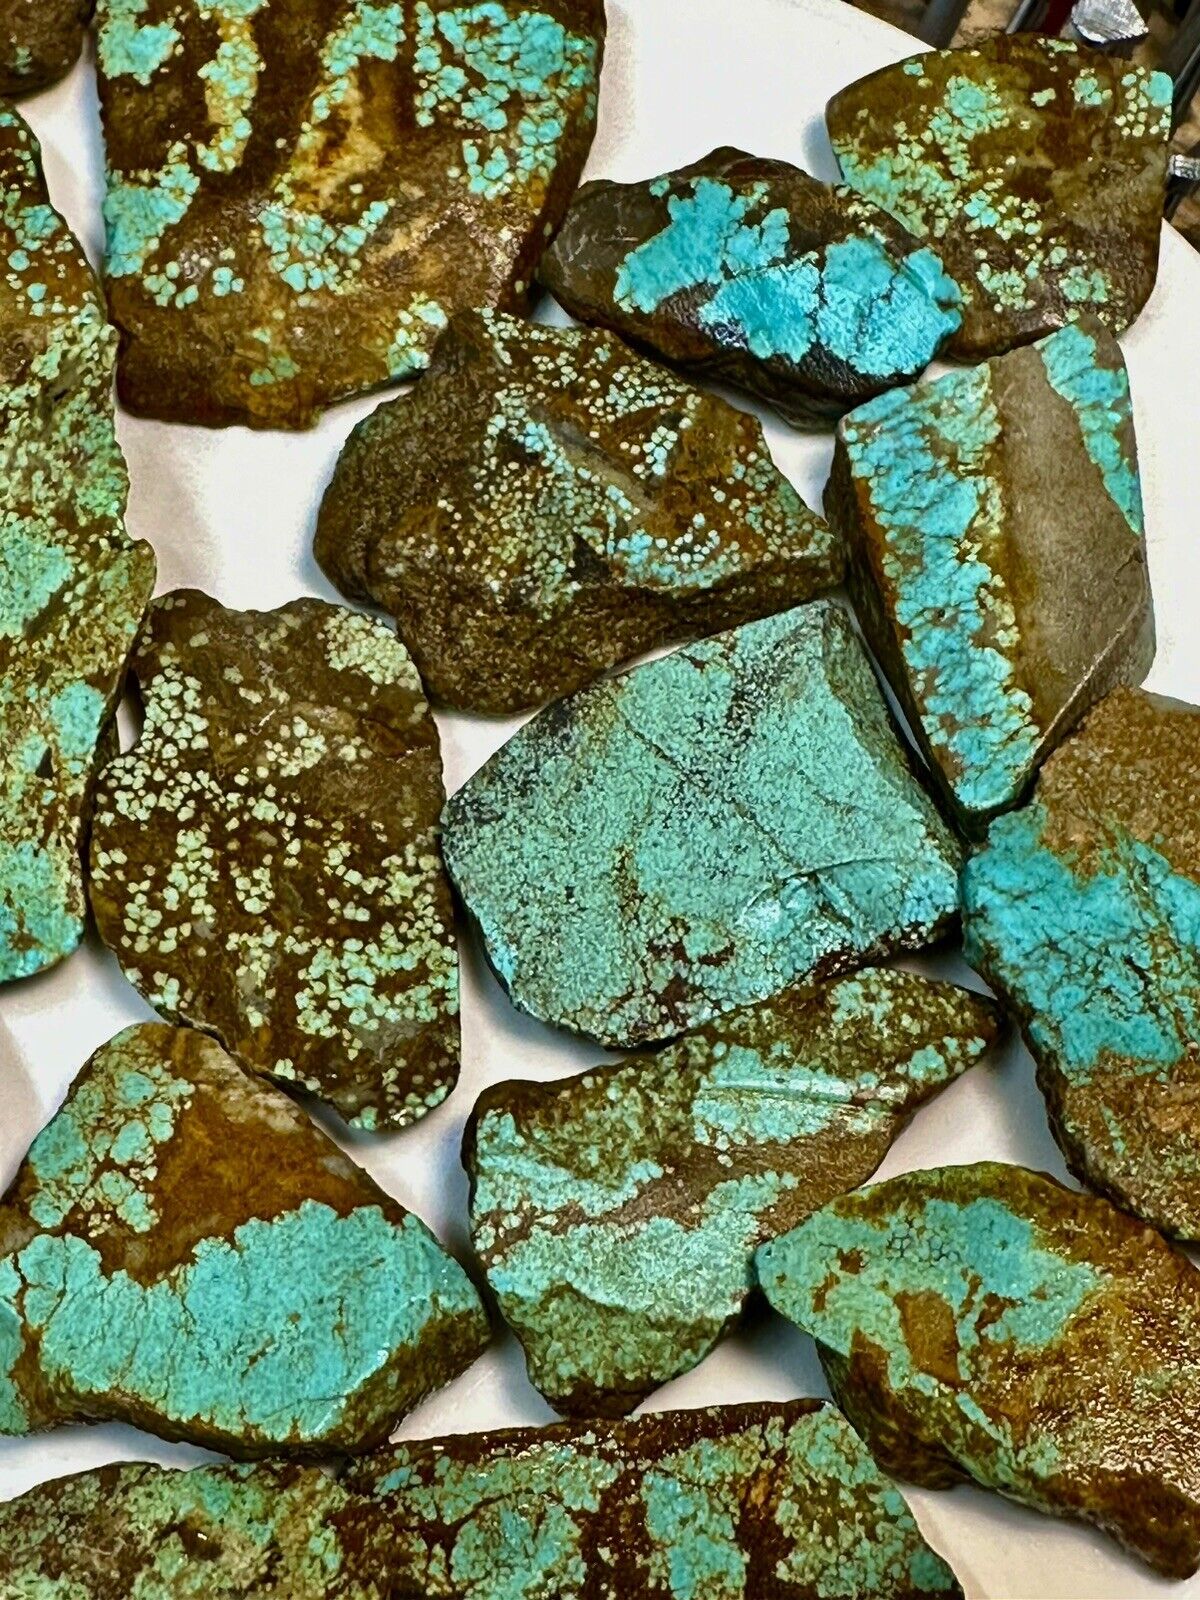 Awesome NV#8 Double Stabilized. Turquoise Slabs No crumble 1/4 LB, 115 g.